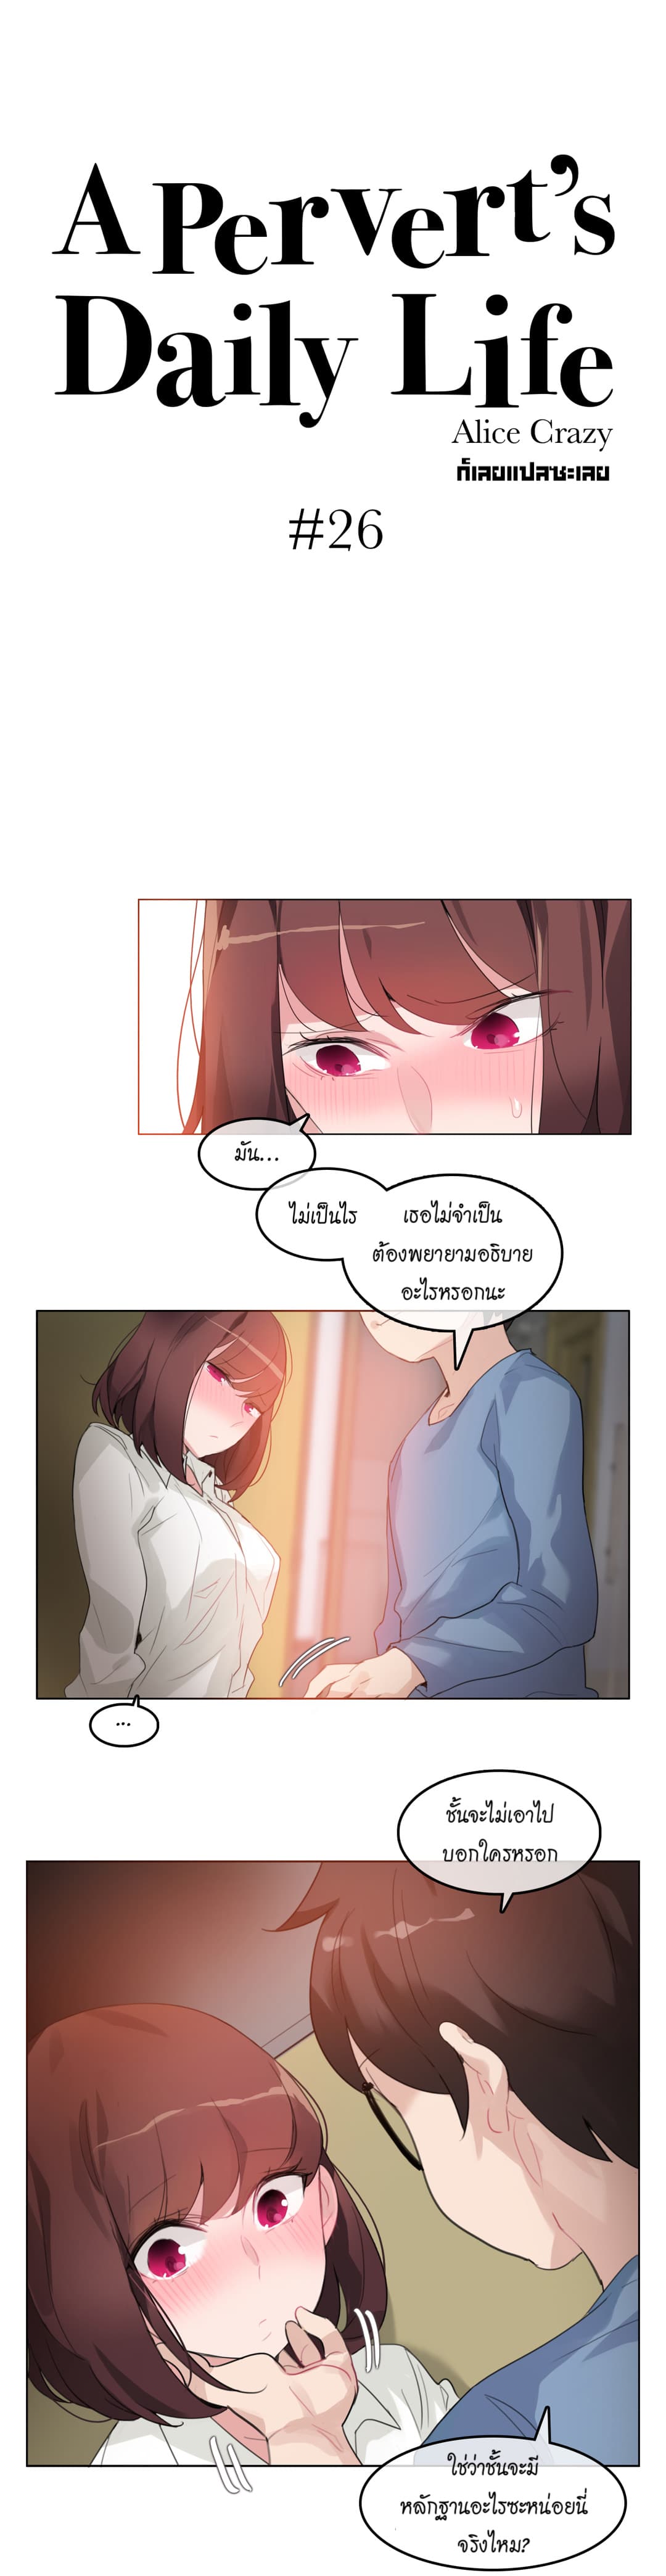 A Pervert’s Daily Life 26 (2)